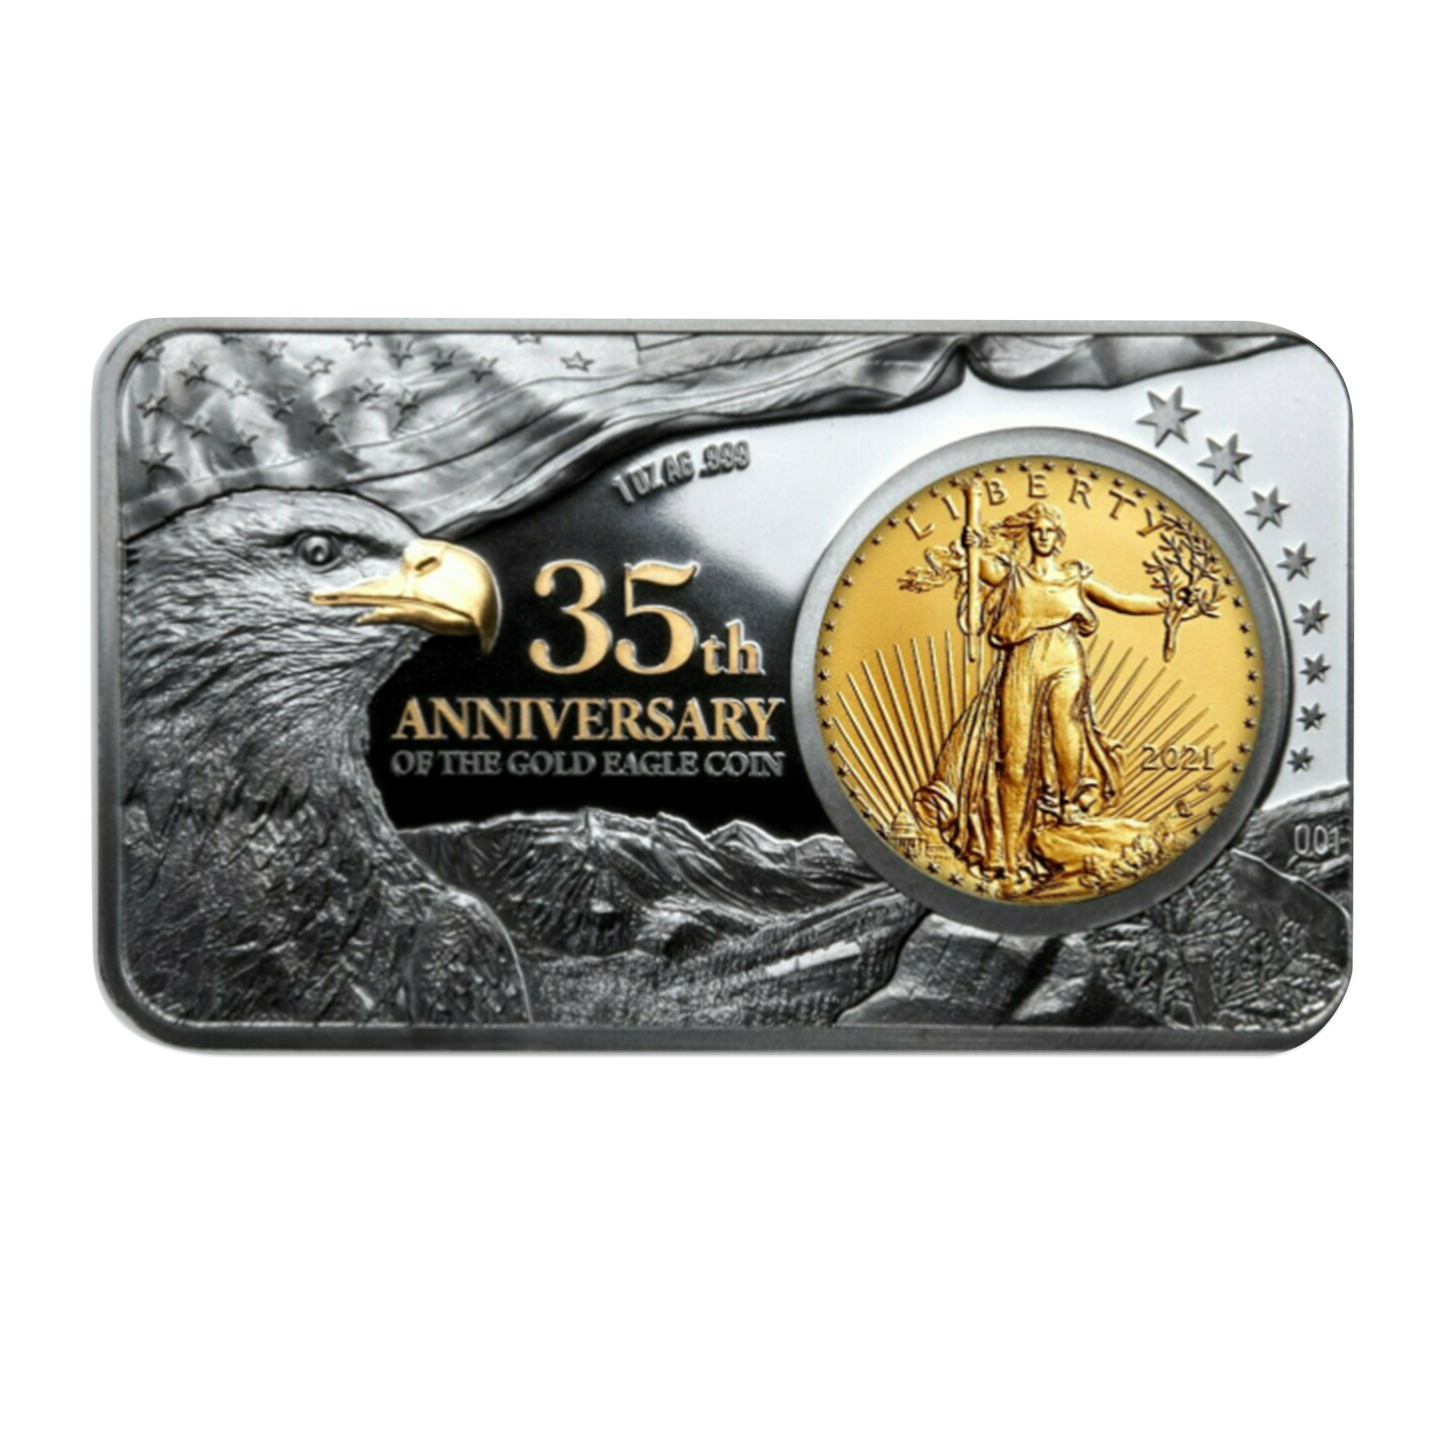 2021 Gold Eagle Silver Bar Black Proof & 24 Gold Plating - Brilliant Uncirculated